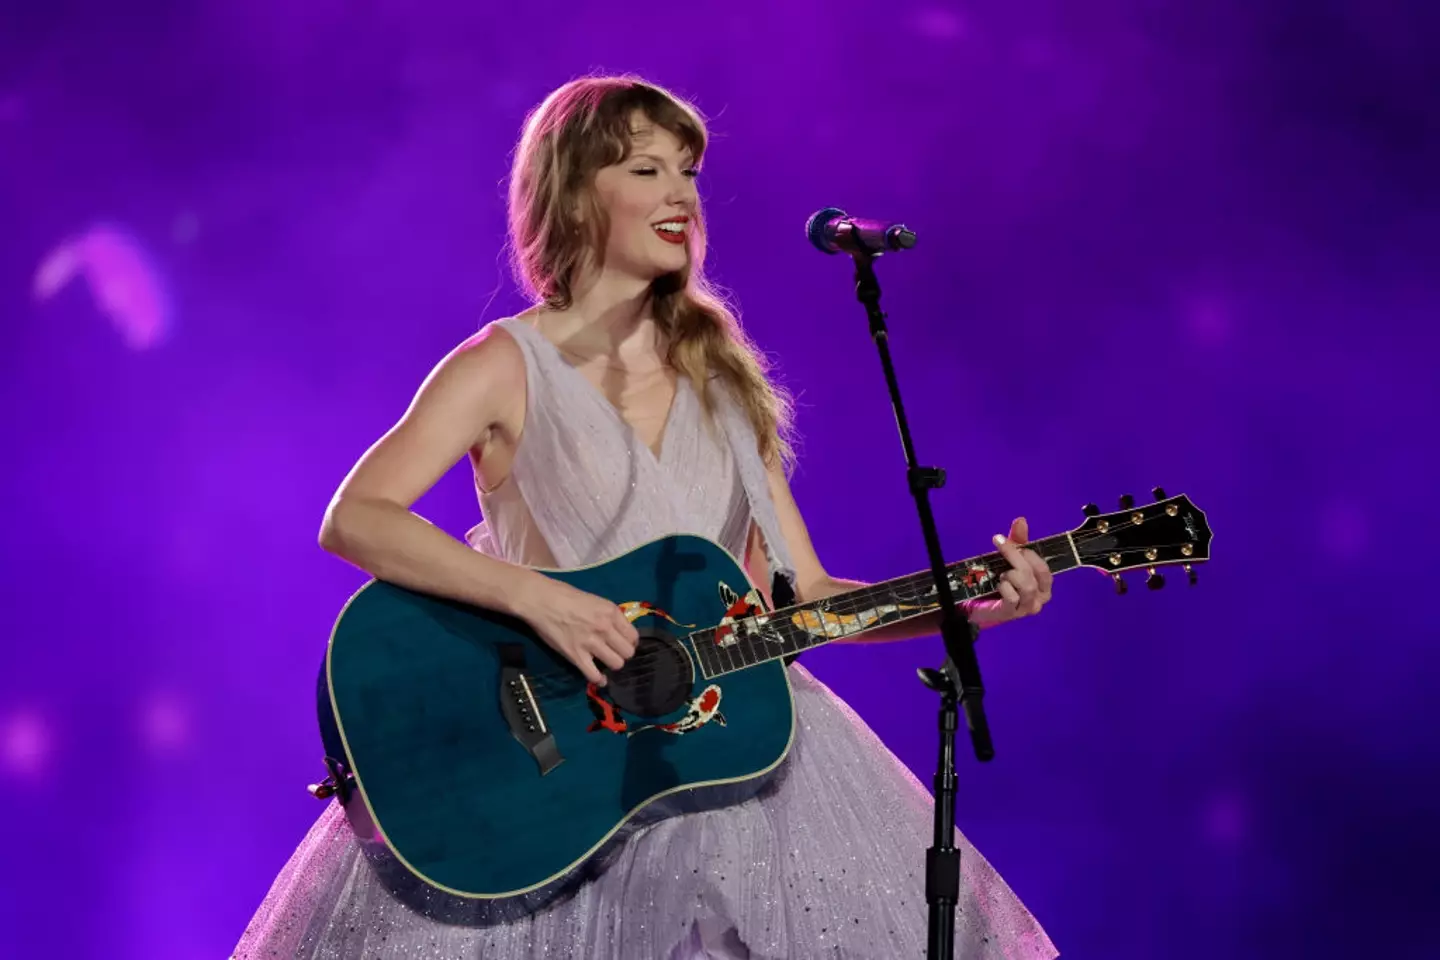 Swift's new album dropped today. (Ashok Kumar/TAS24/Getty Images for TAS Rights Management)